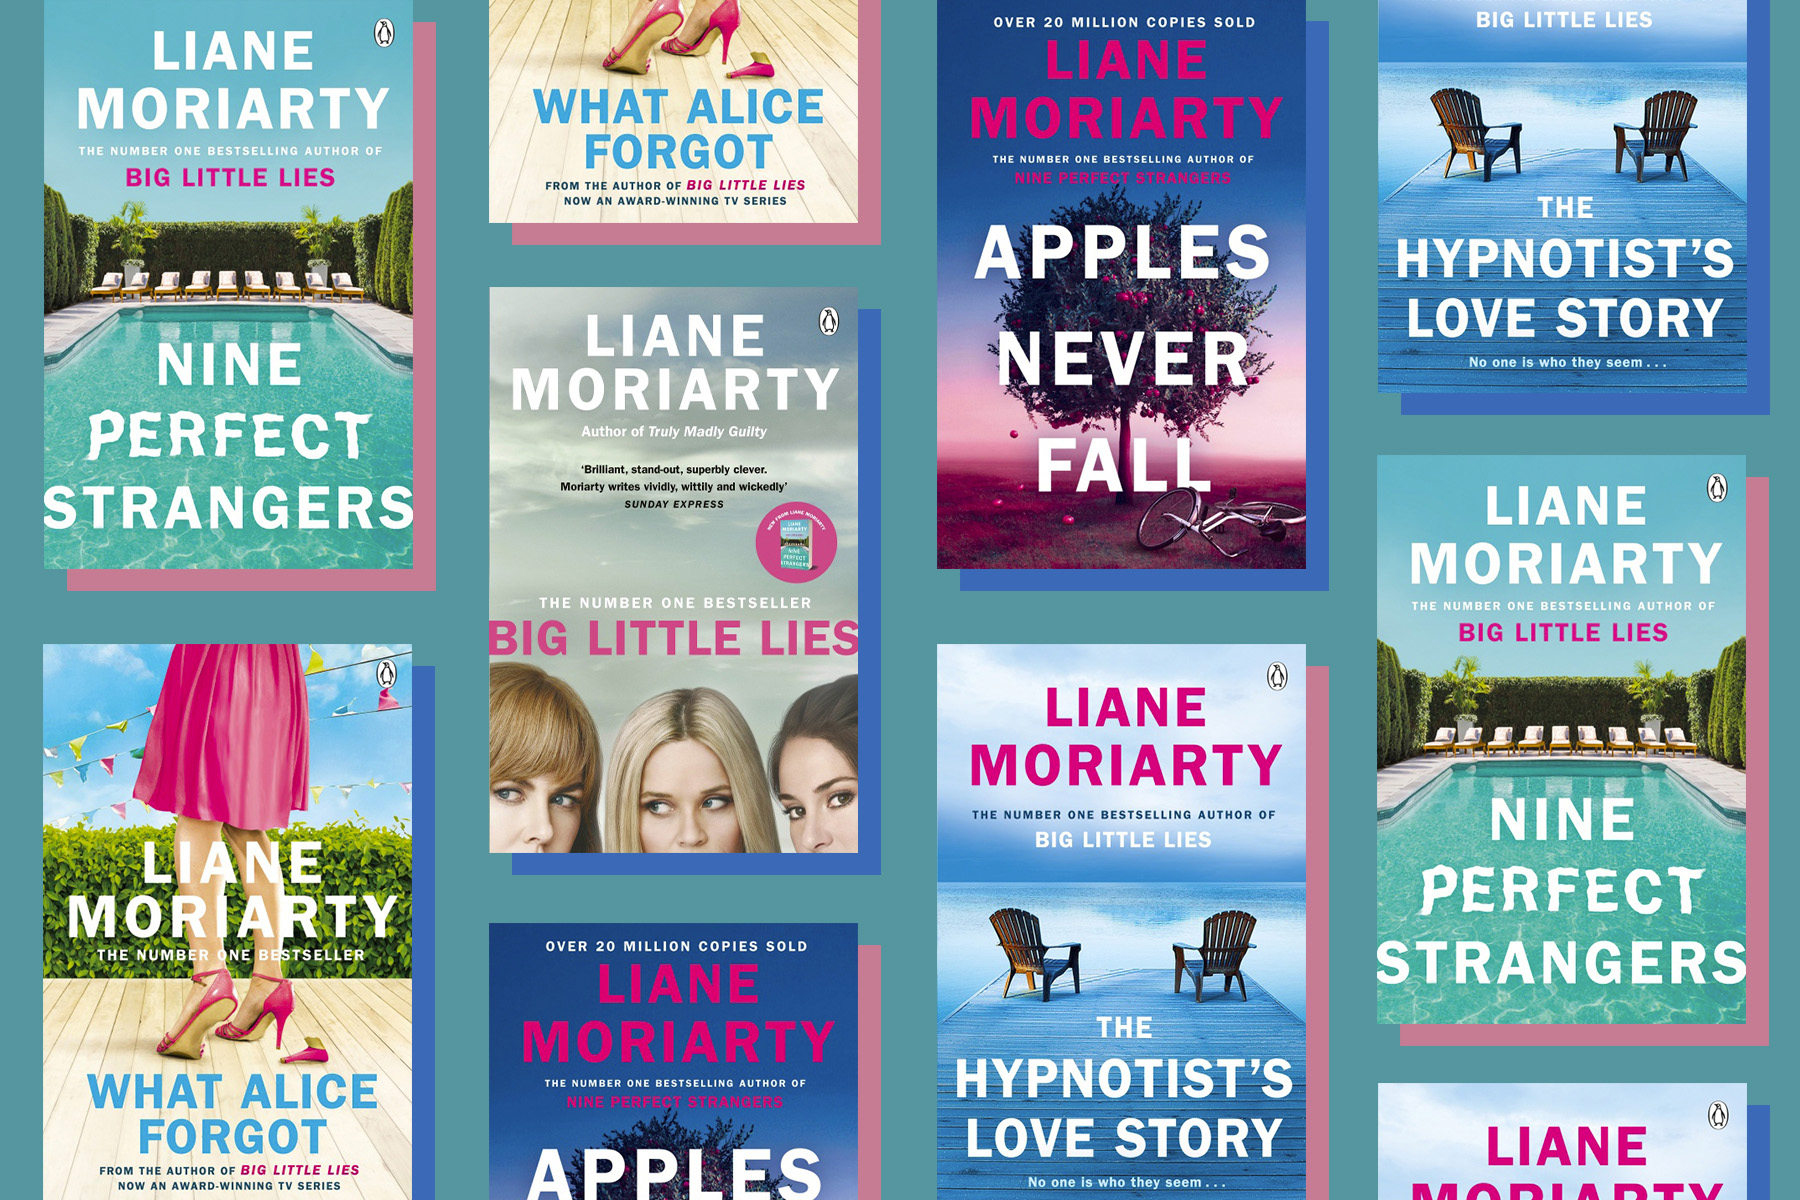 Covers of Liane Moriarty's books against a blue background.